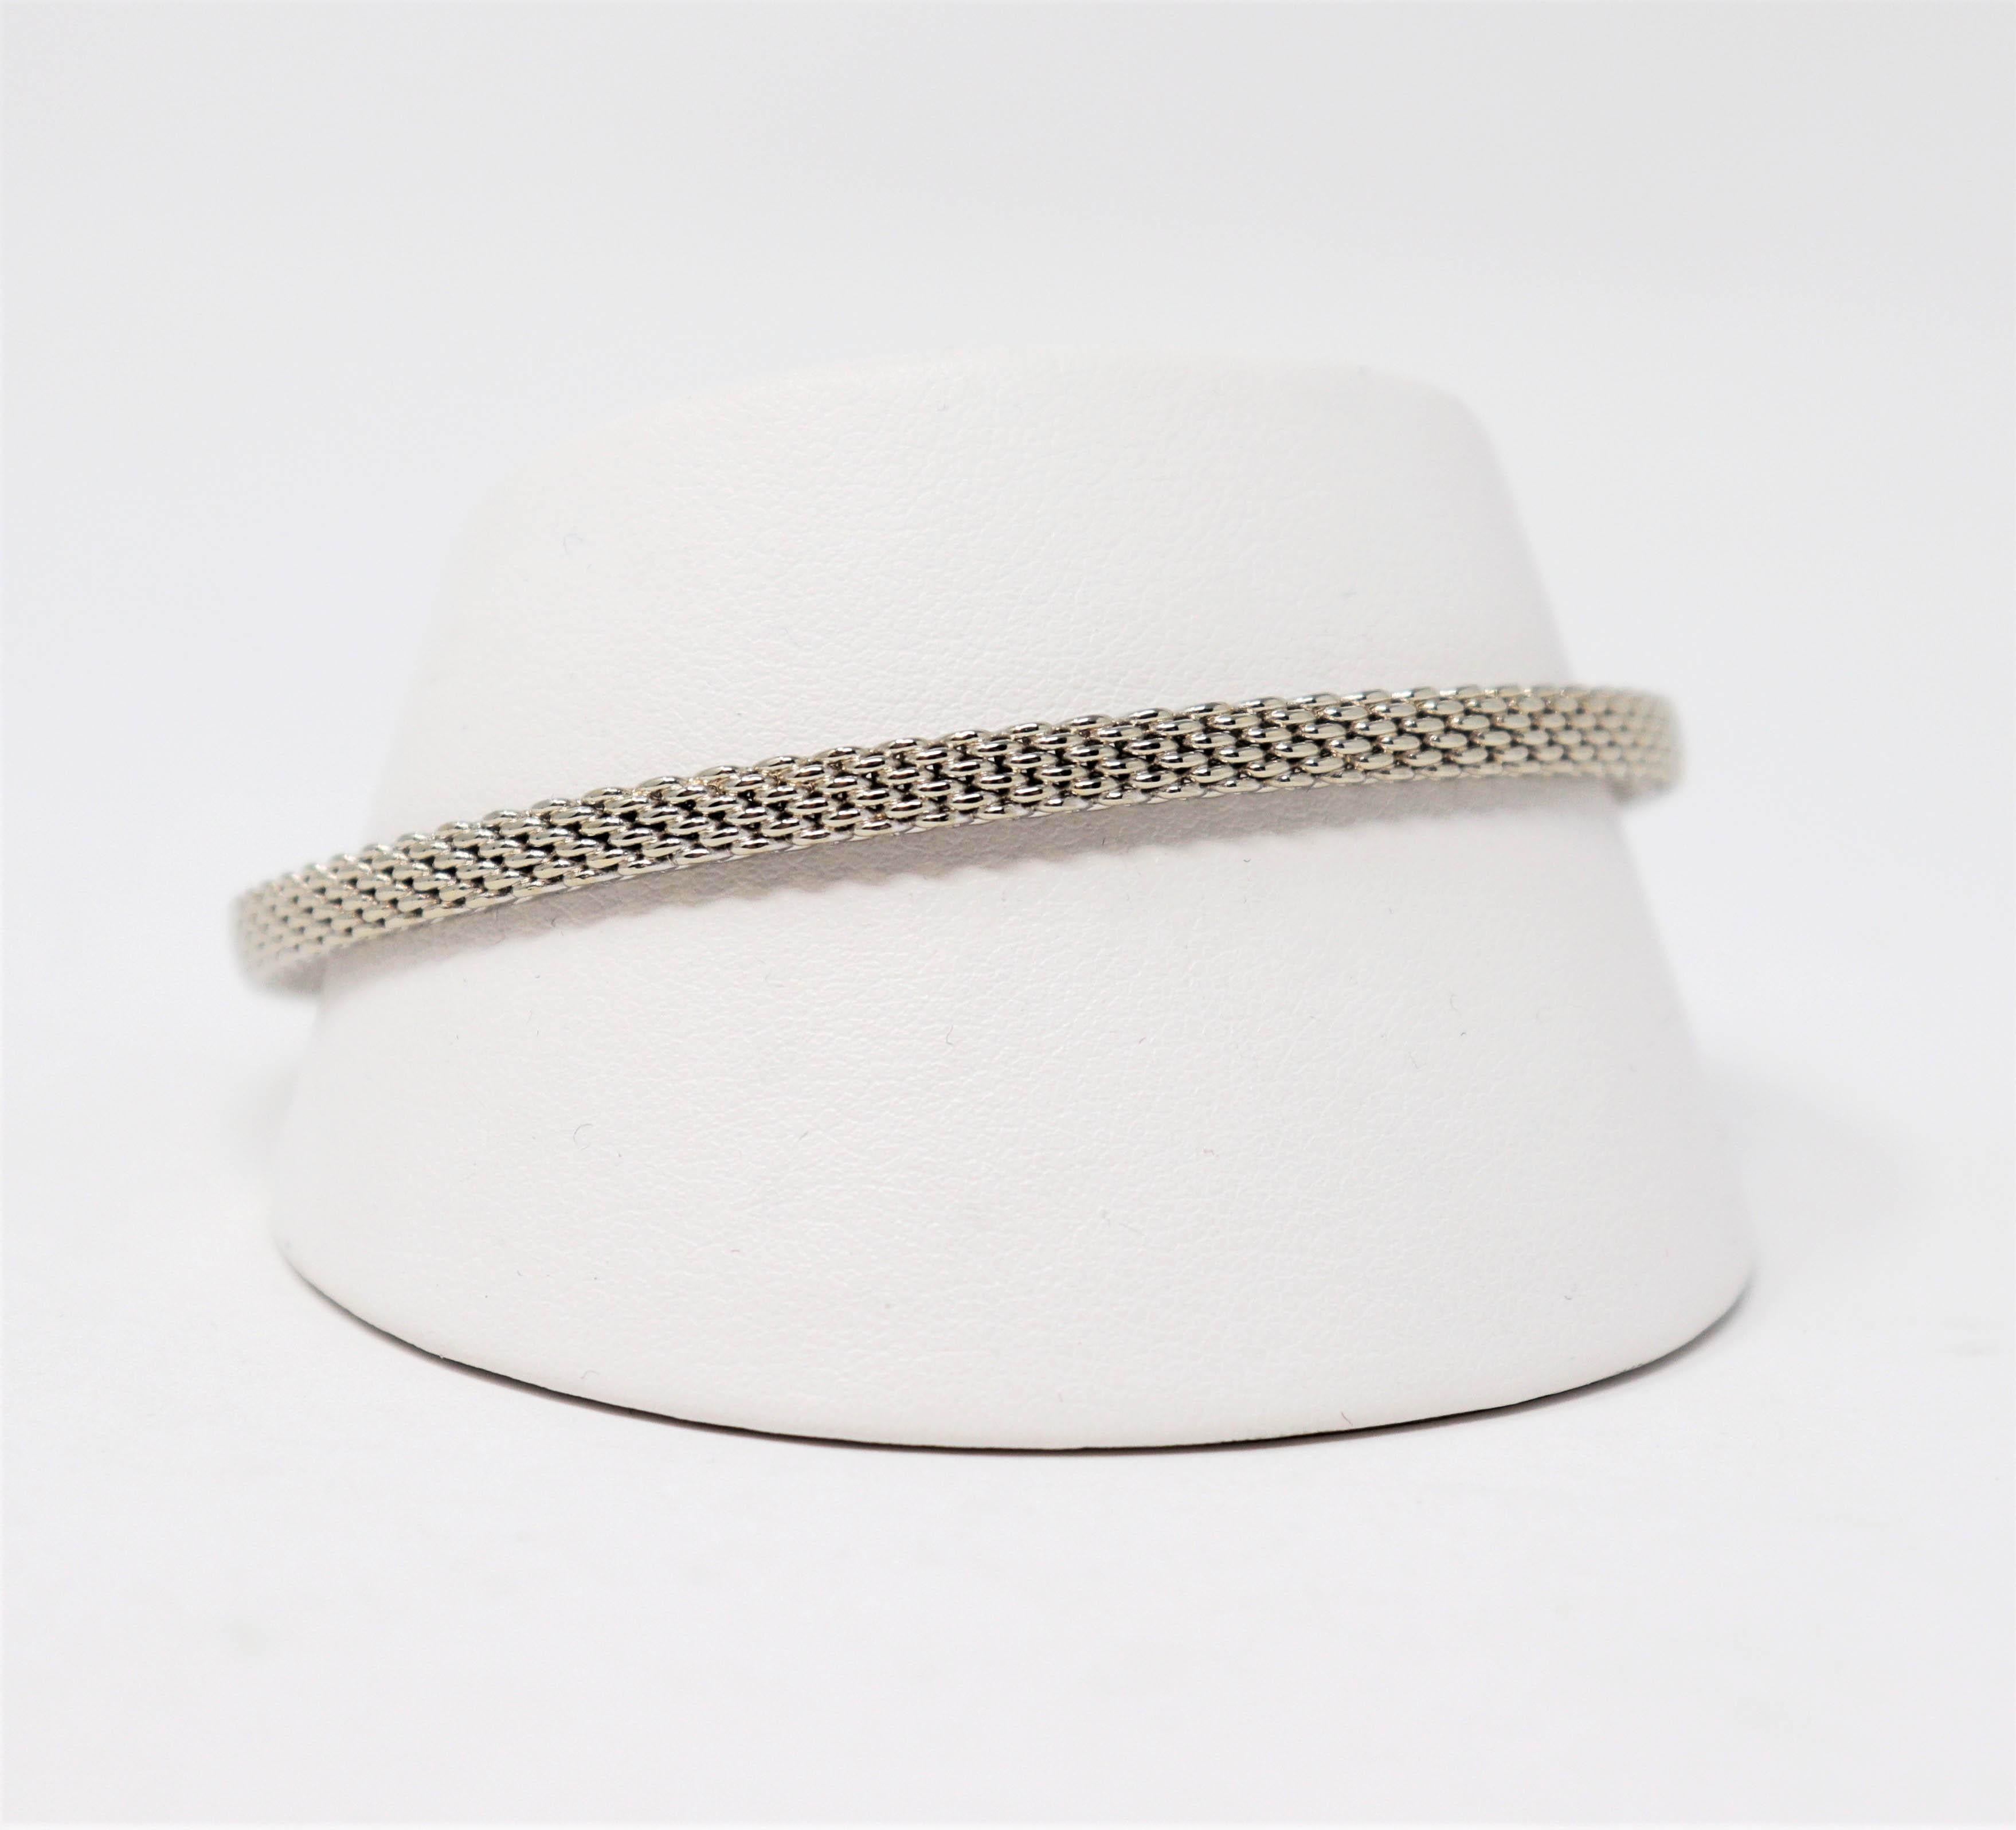 Simple yet stunning Somerset mesh bracelet by renowned jeweler, Tiffany & Co. The rigid woven bangle boasts a sophisticated feel, while the classic simplicity gives it a timeless elegance.

The Somerset bracelet features an ultra fine, structured